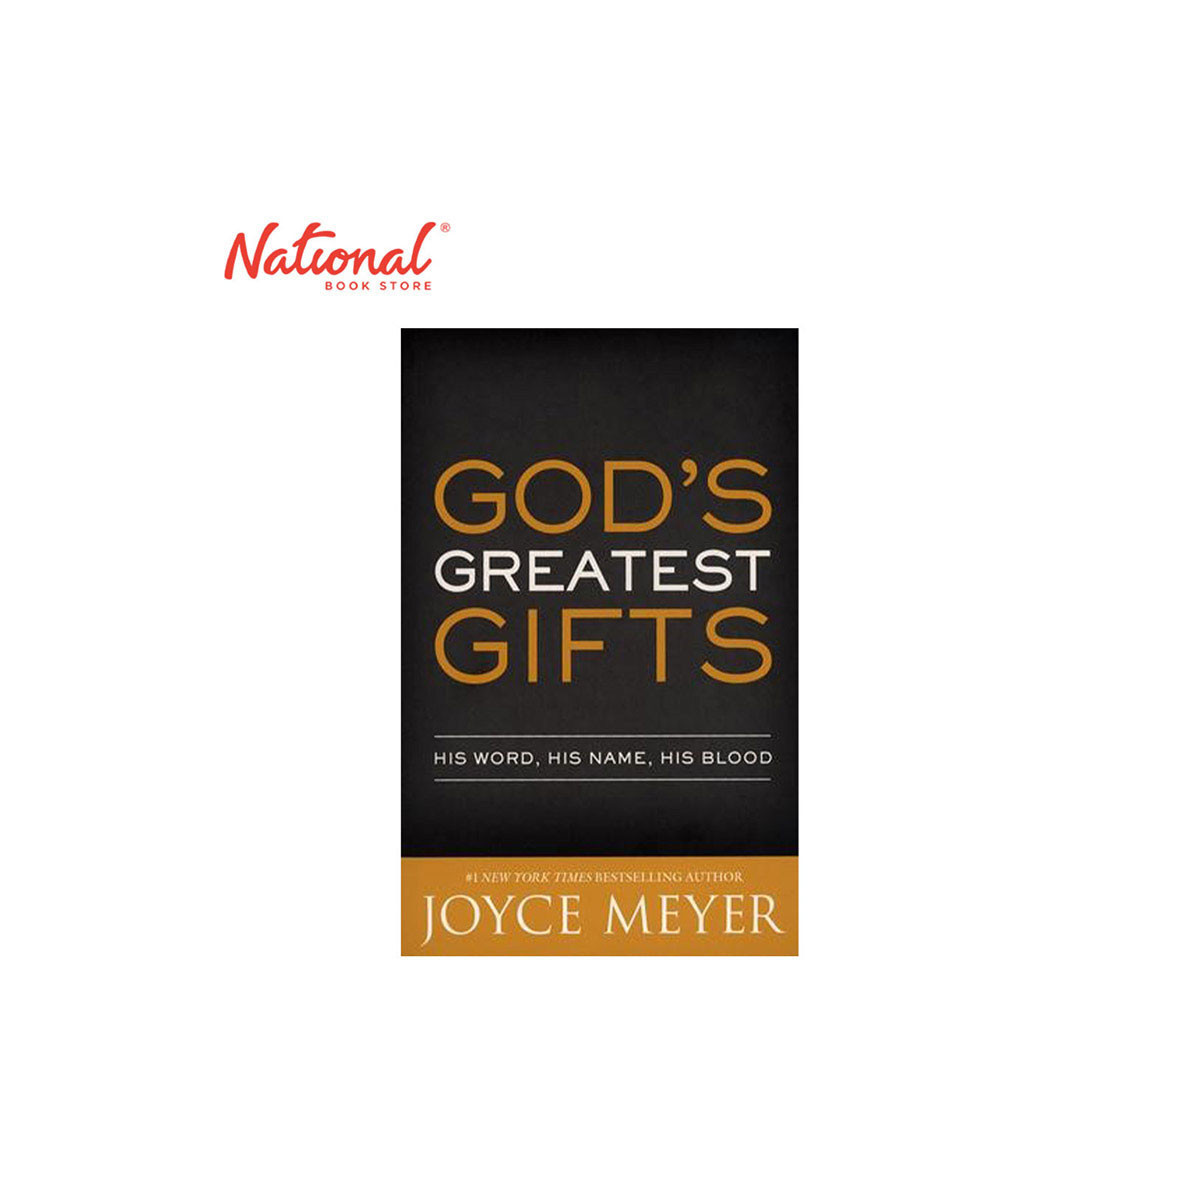 God's Greatest Gifts: His Word, His Name, His Blood by Joyce Meyer - Trade Paperback - Bible Studies